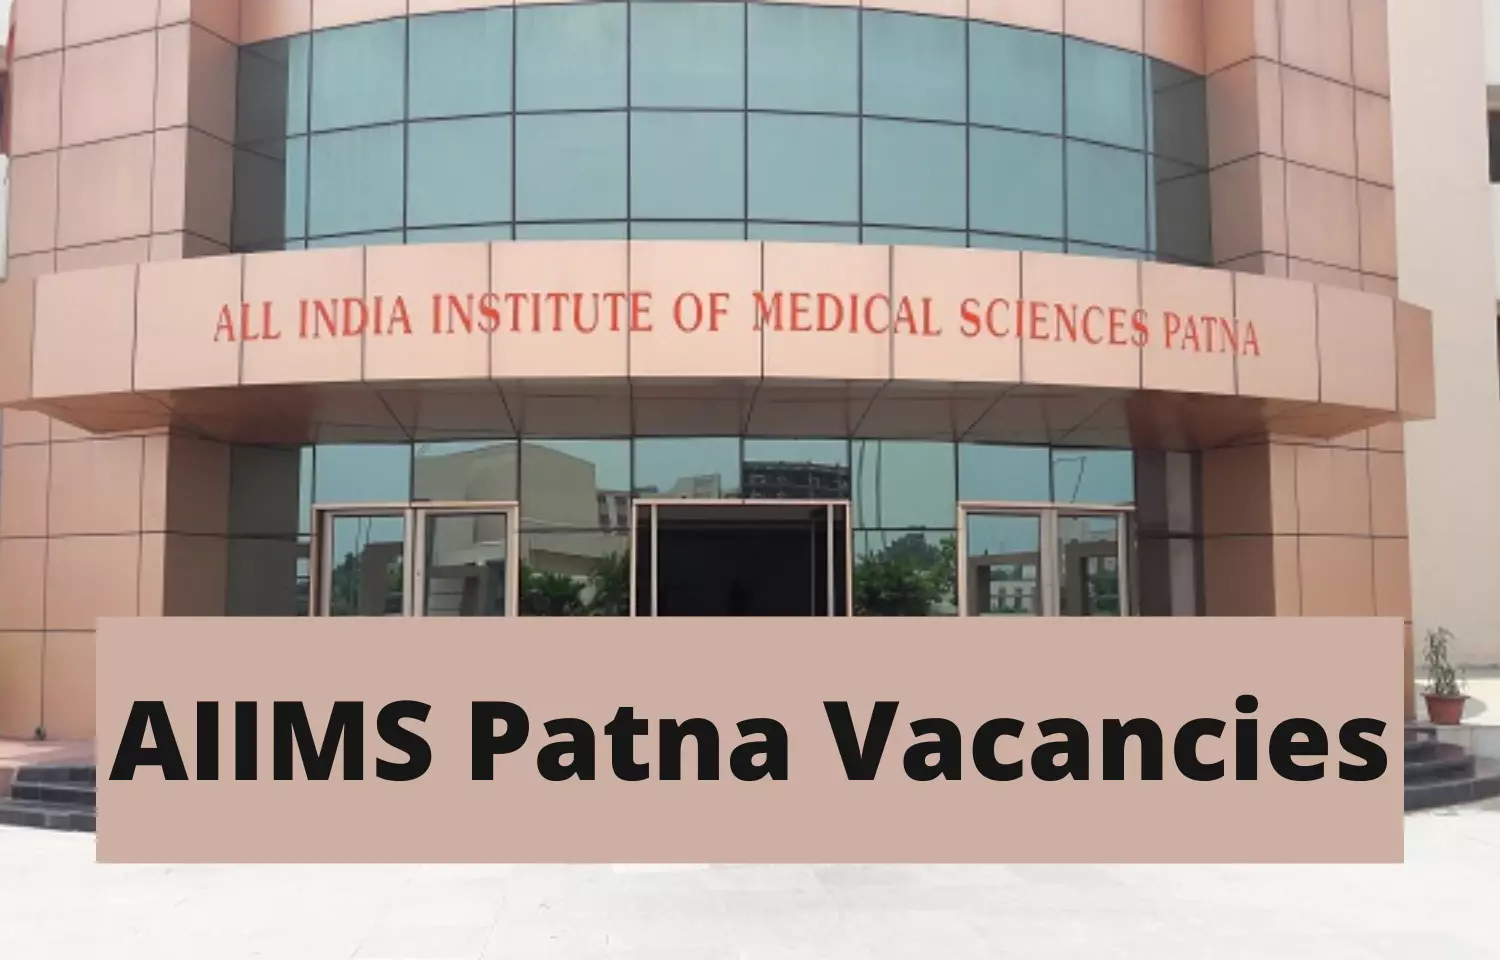 Walk In Interview At AIIMS Patna For Senior Resident Post in Radiotherapy Dept, Details